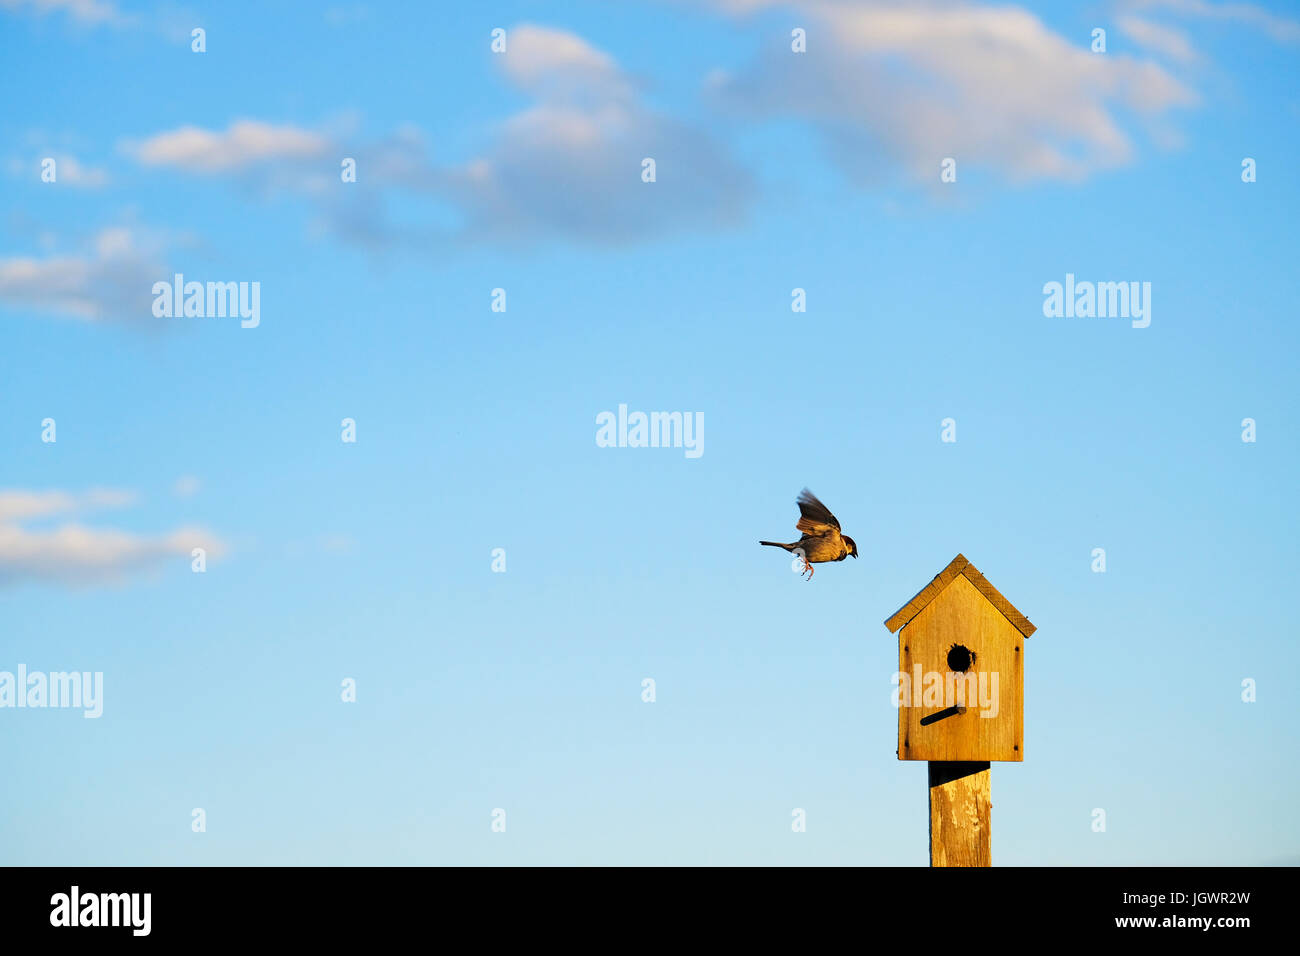 Bird flying to wooden birdhouse against blue sky Stock Photo